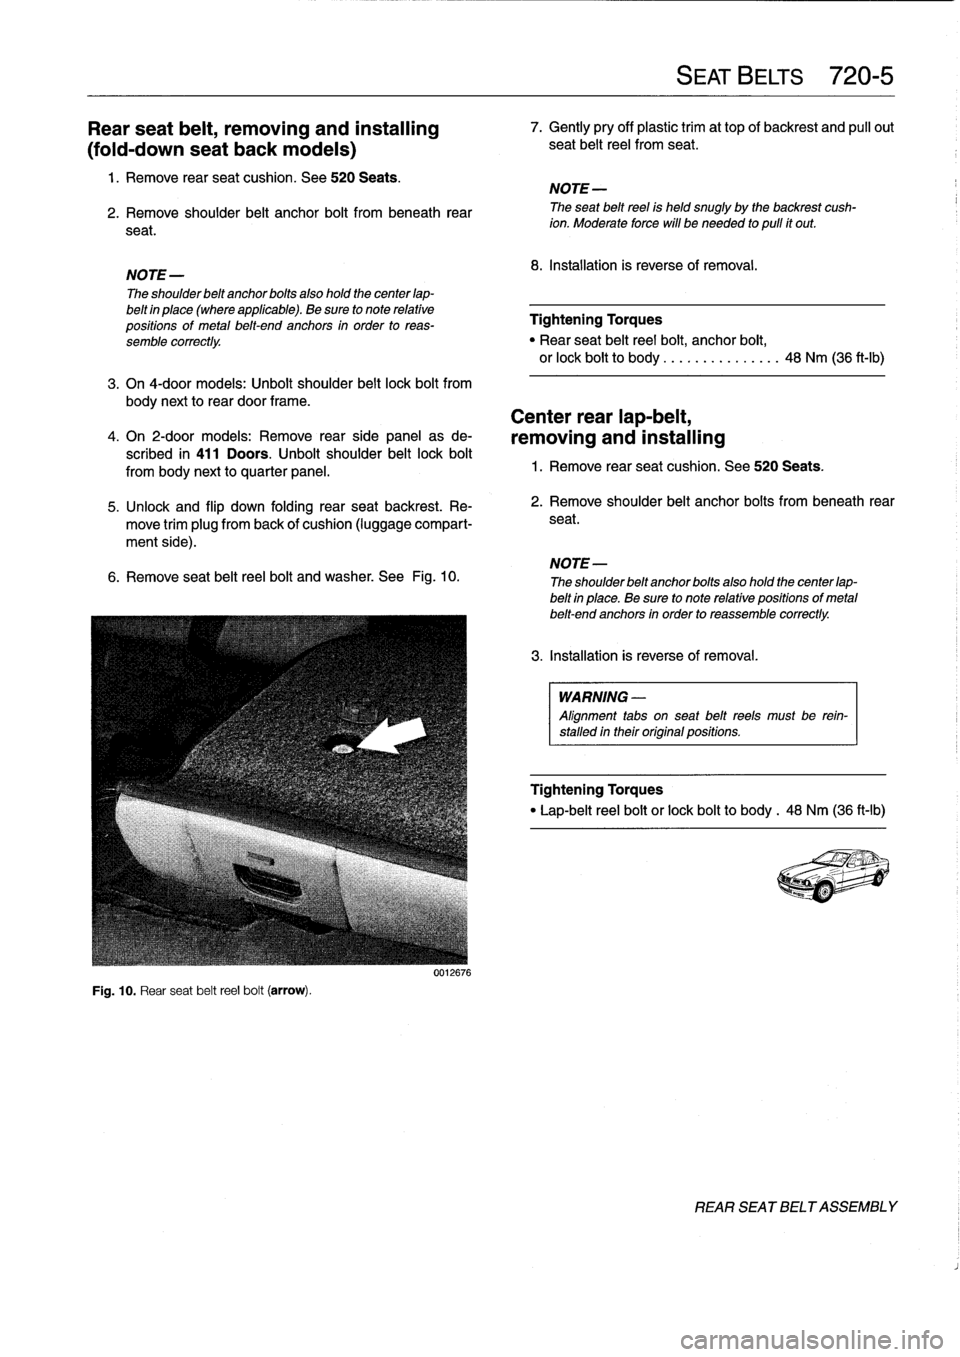 BMW M3 1993 E36 Repair Manual 
Rear
seat
belt,
removing
and
installing

(foid-down
seat
back
modeis)

1
.
Remove
rear
seat
cushion
.
See
520
Seats
.

2
.
Remove
shoulder
belt
anchor
bolt
from
beneath
rear

seat
.

NOTE
-

The
shou